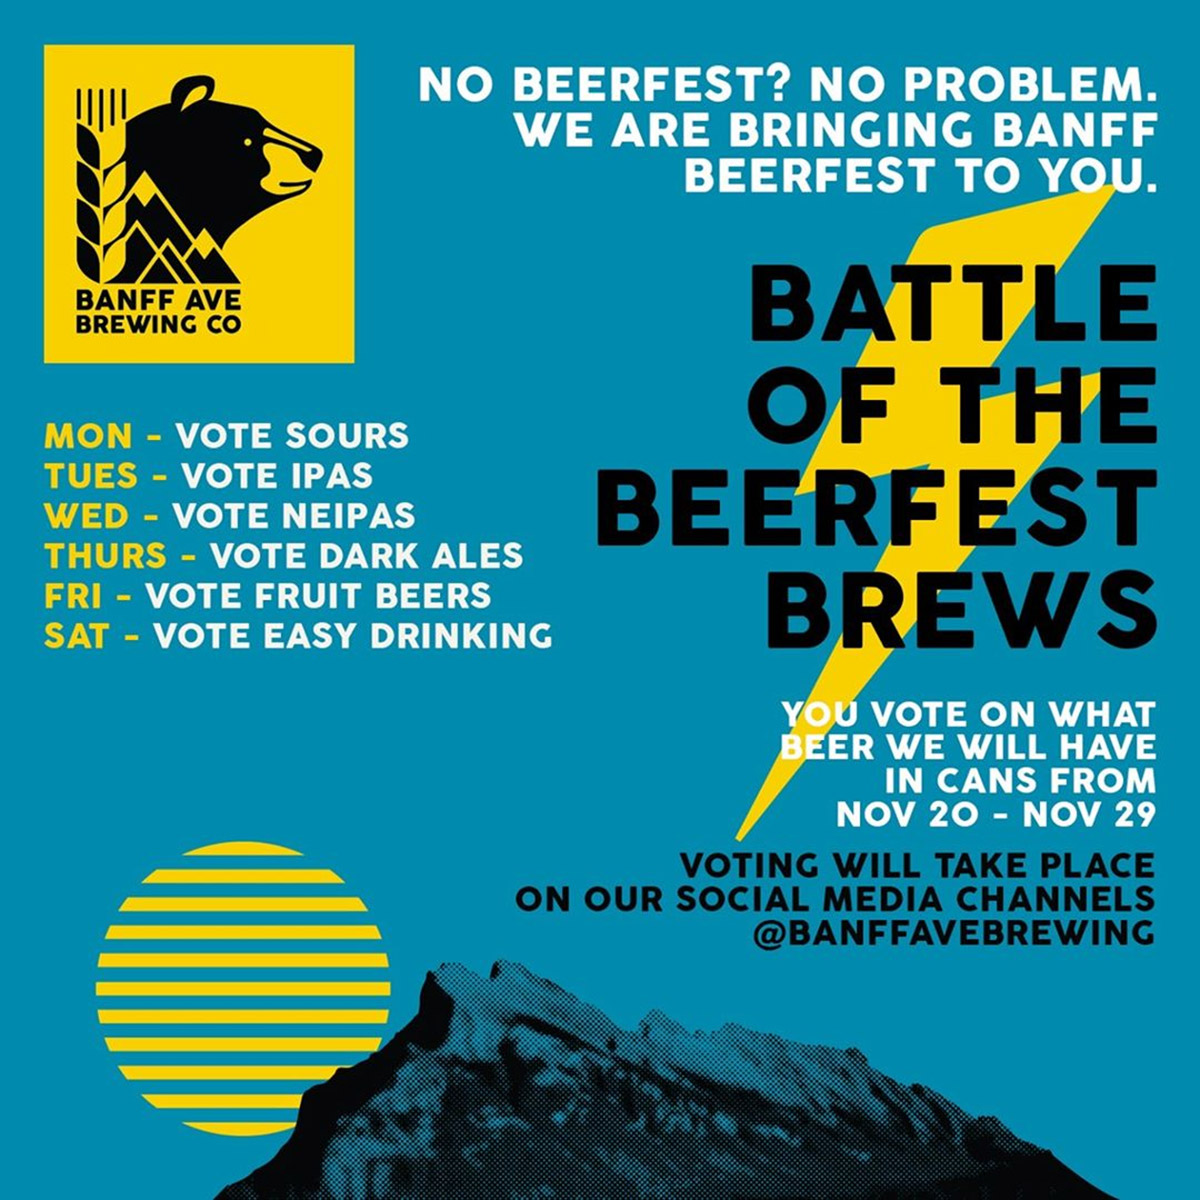 Banff Craft Beer Week Banff Ave Brewing Company battle of the beerfest brews